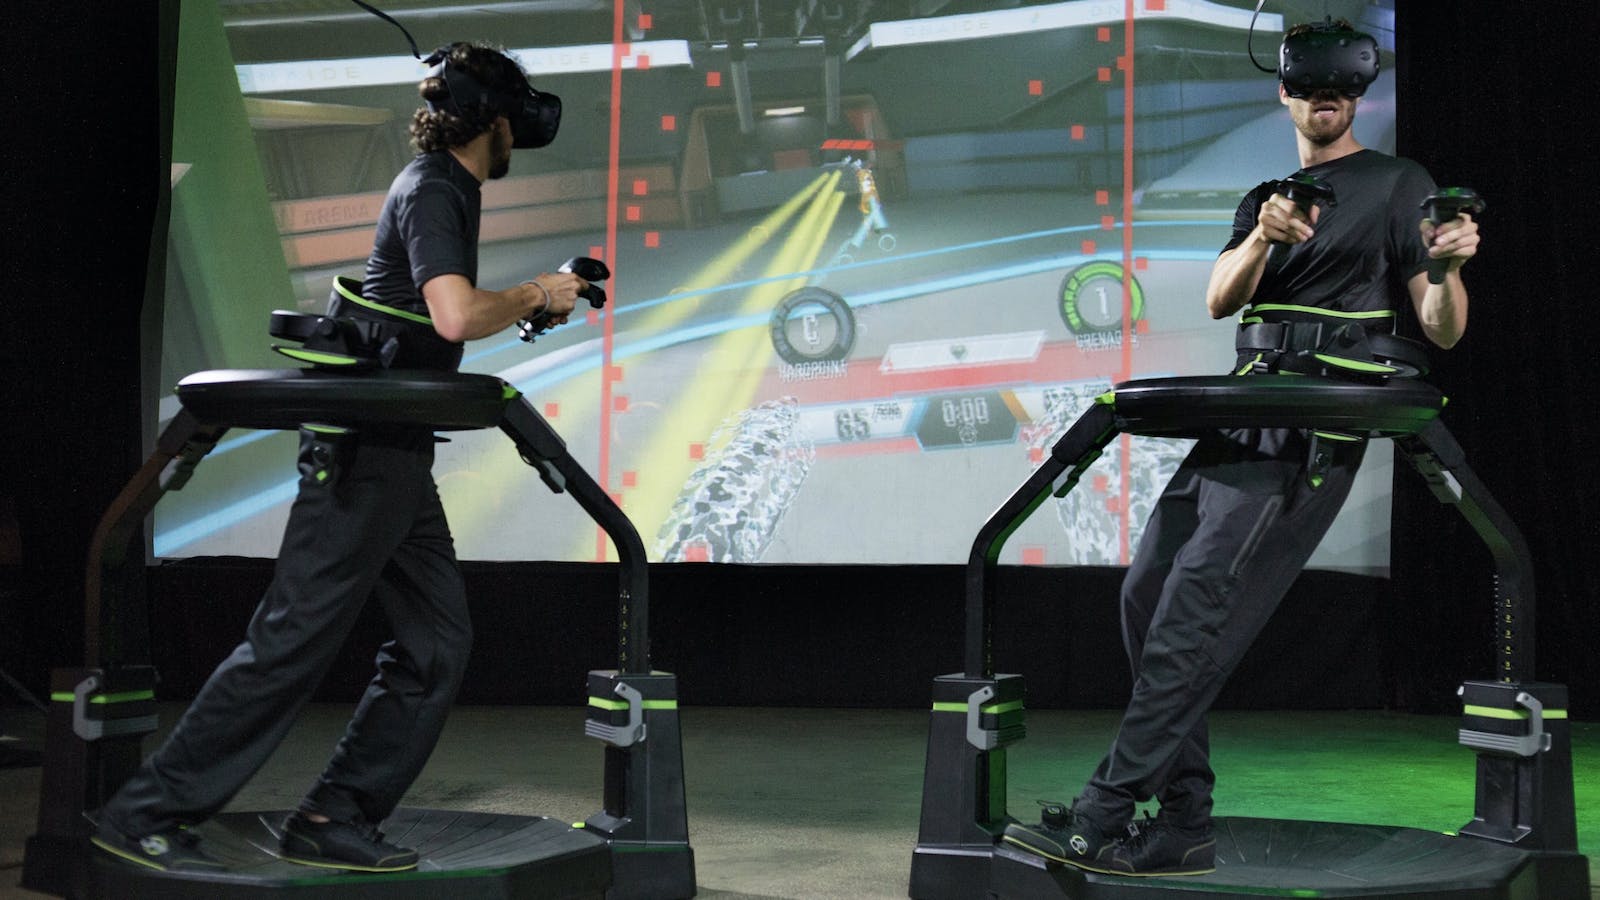 Two VR players using Virtuix Omni Pro treadmills and HTC Vive headsets. Photo by Virtuix